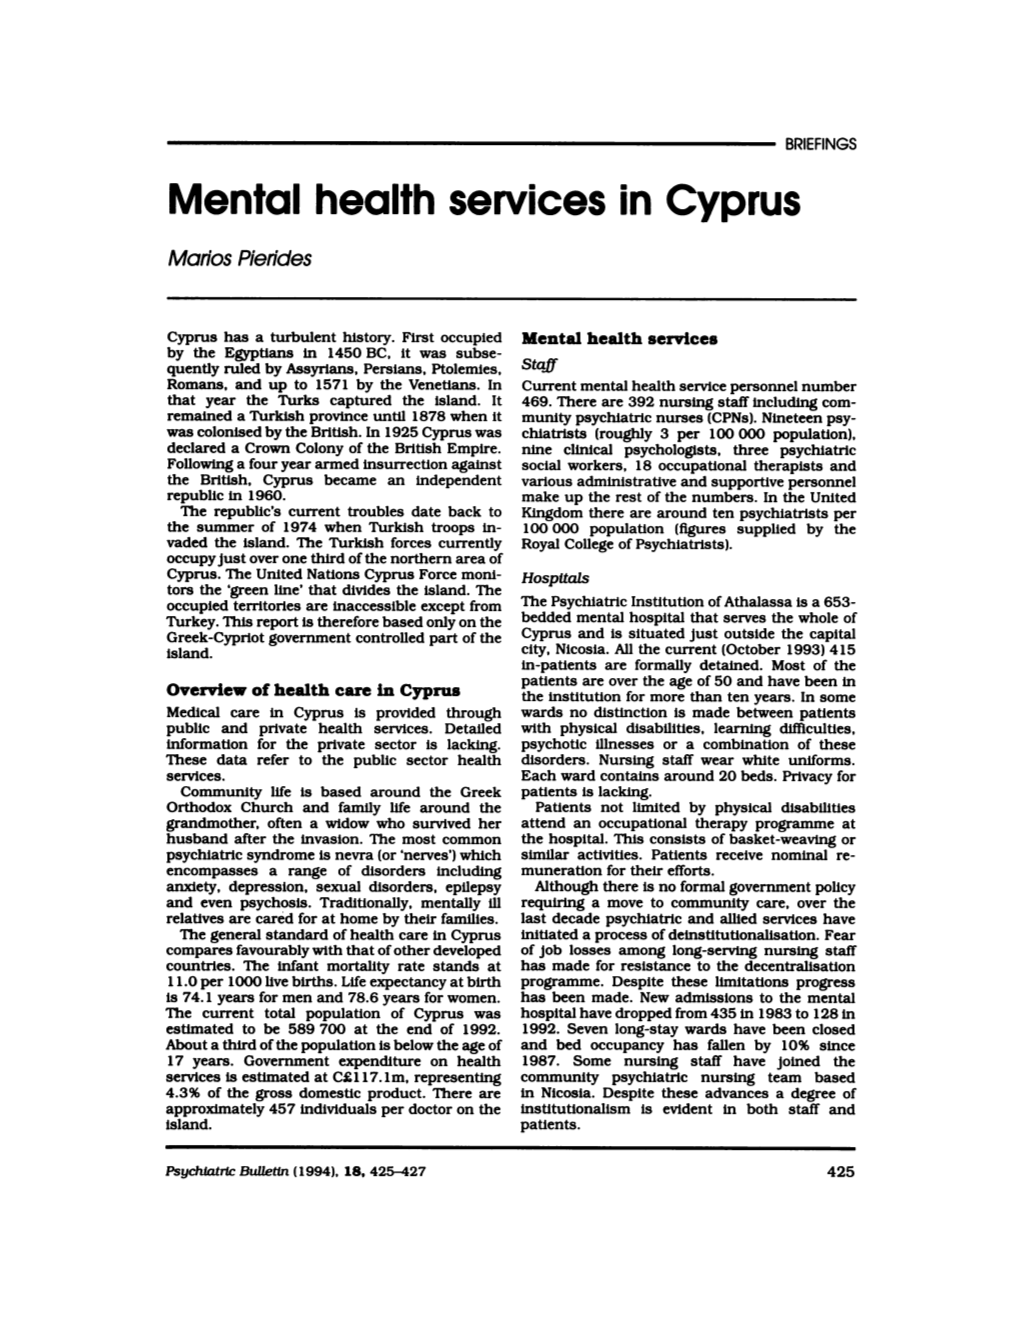 Mental Health Services in Cyprus